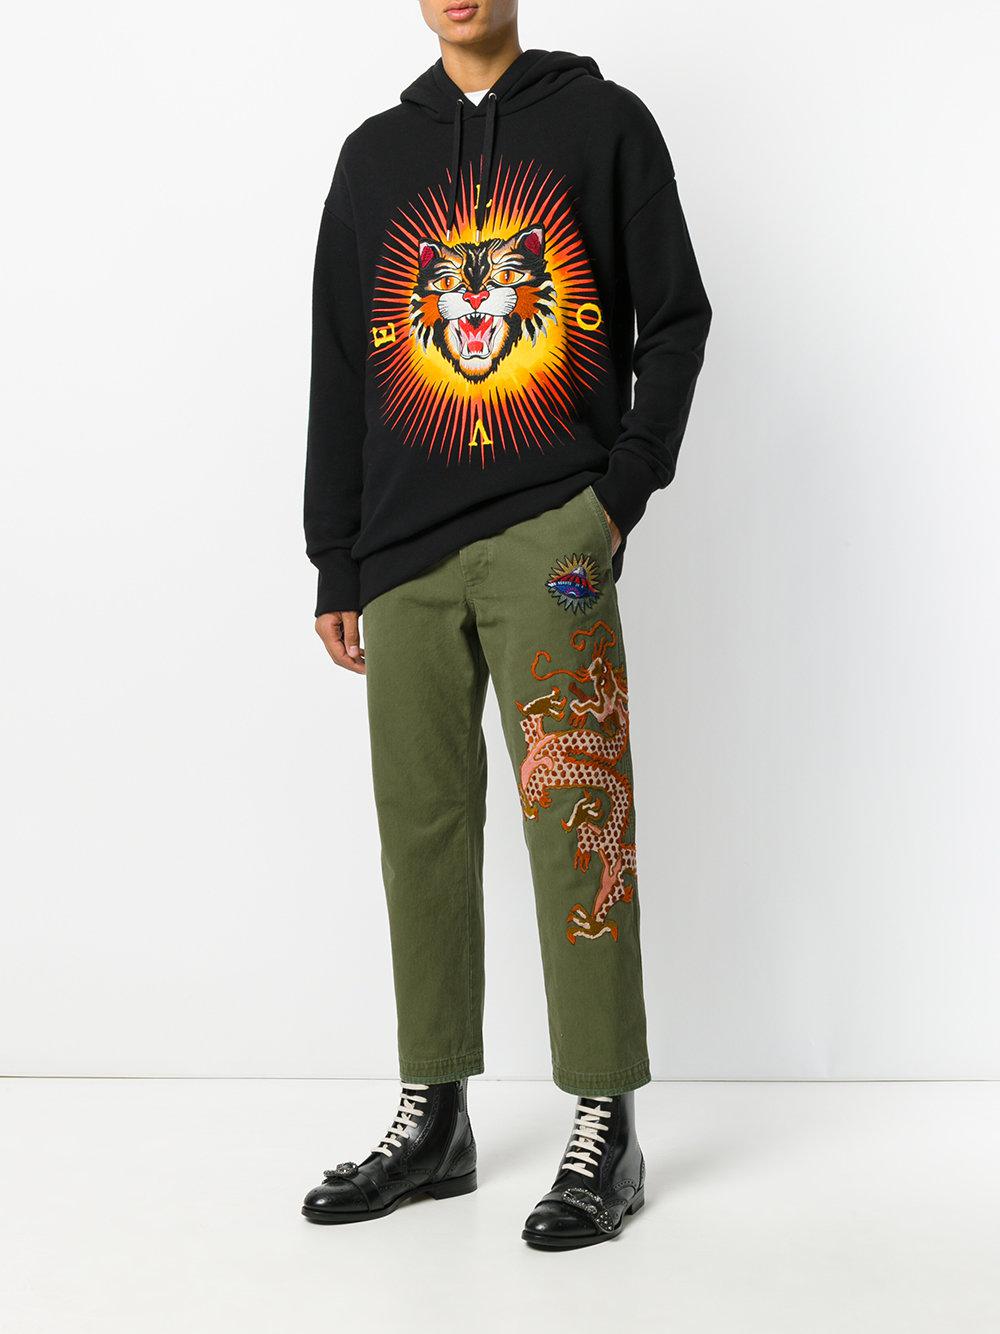 Gucci Cotton Military Embroidered Dragon Trousers in Green for Men - Lyst